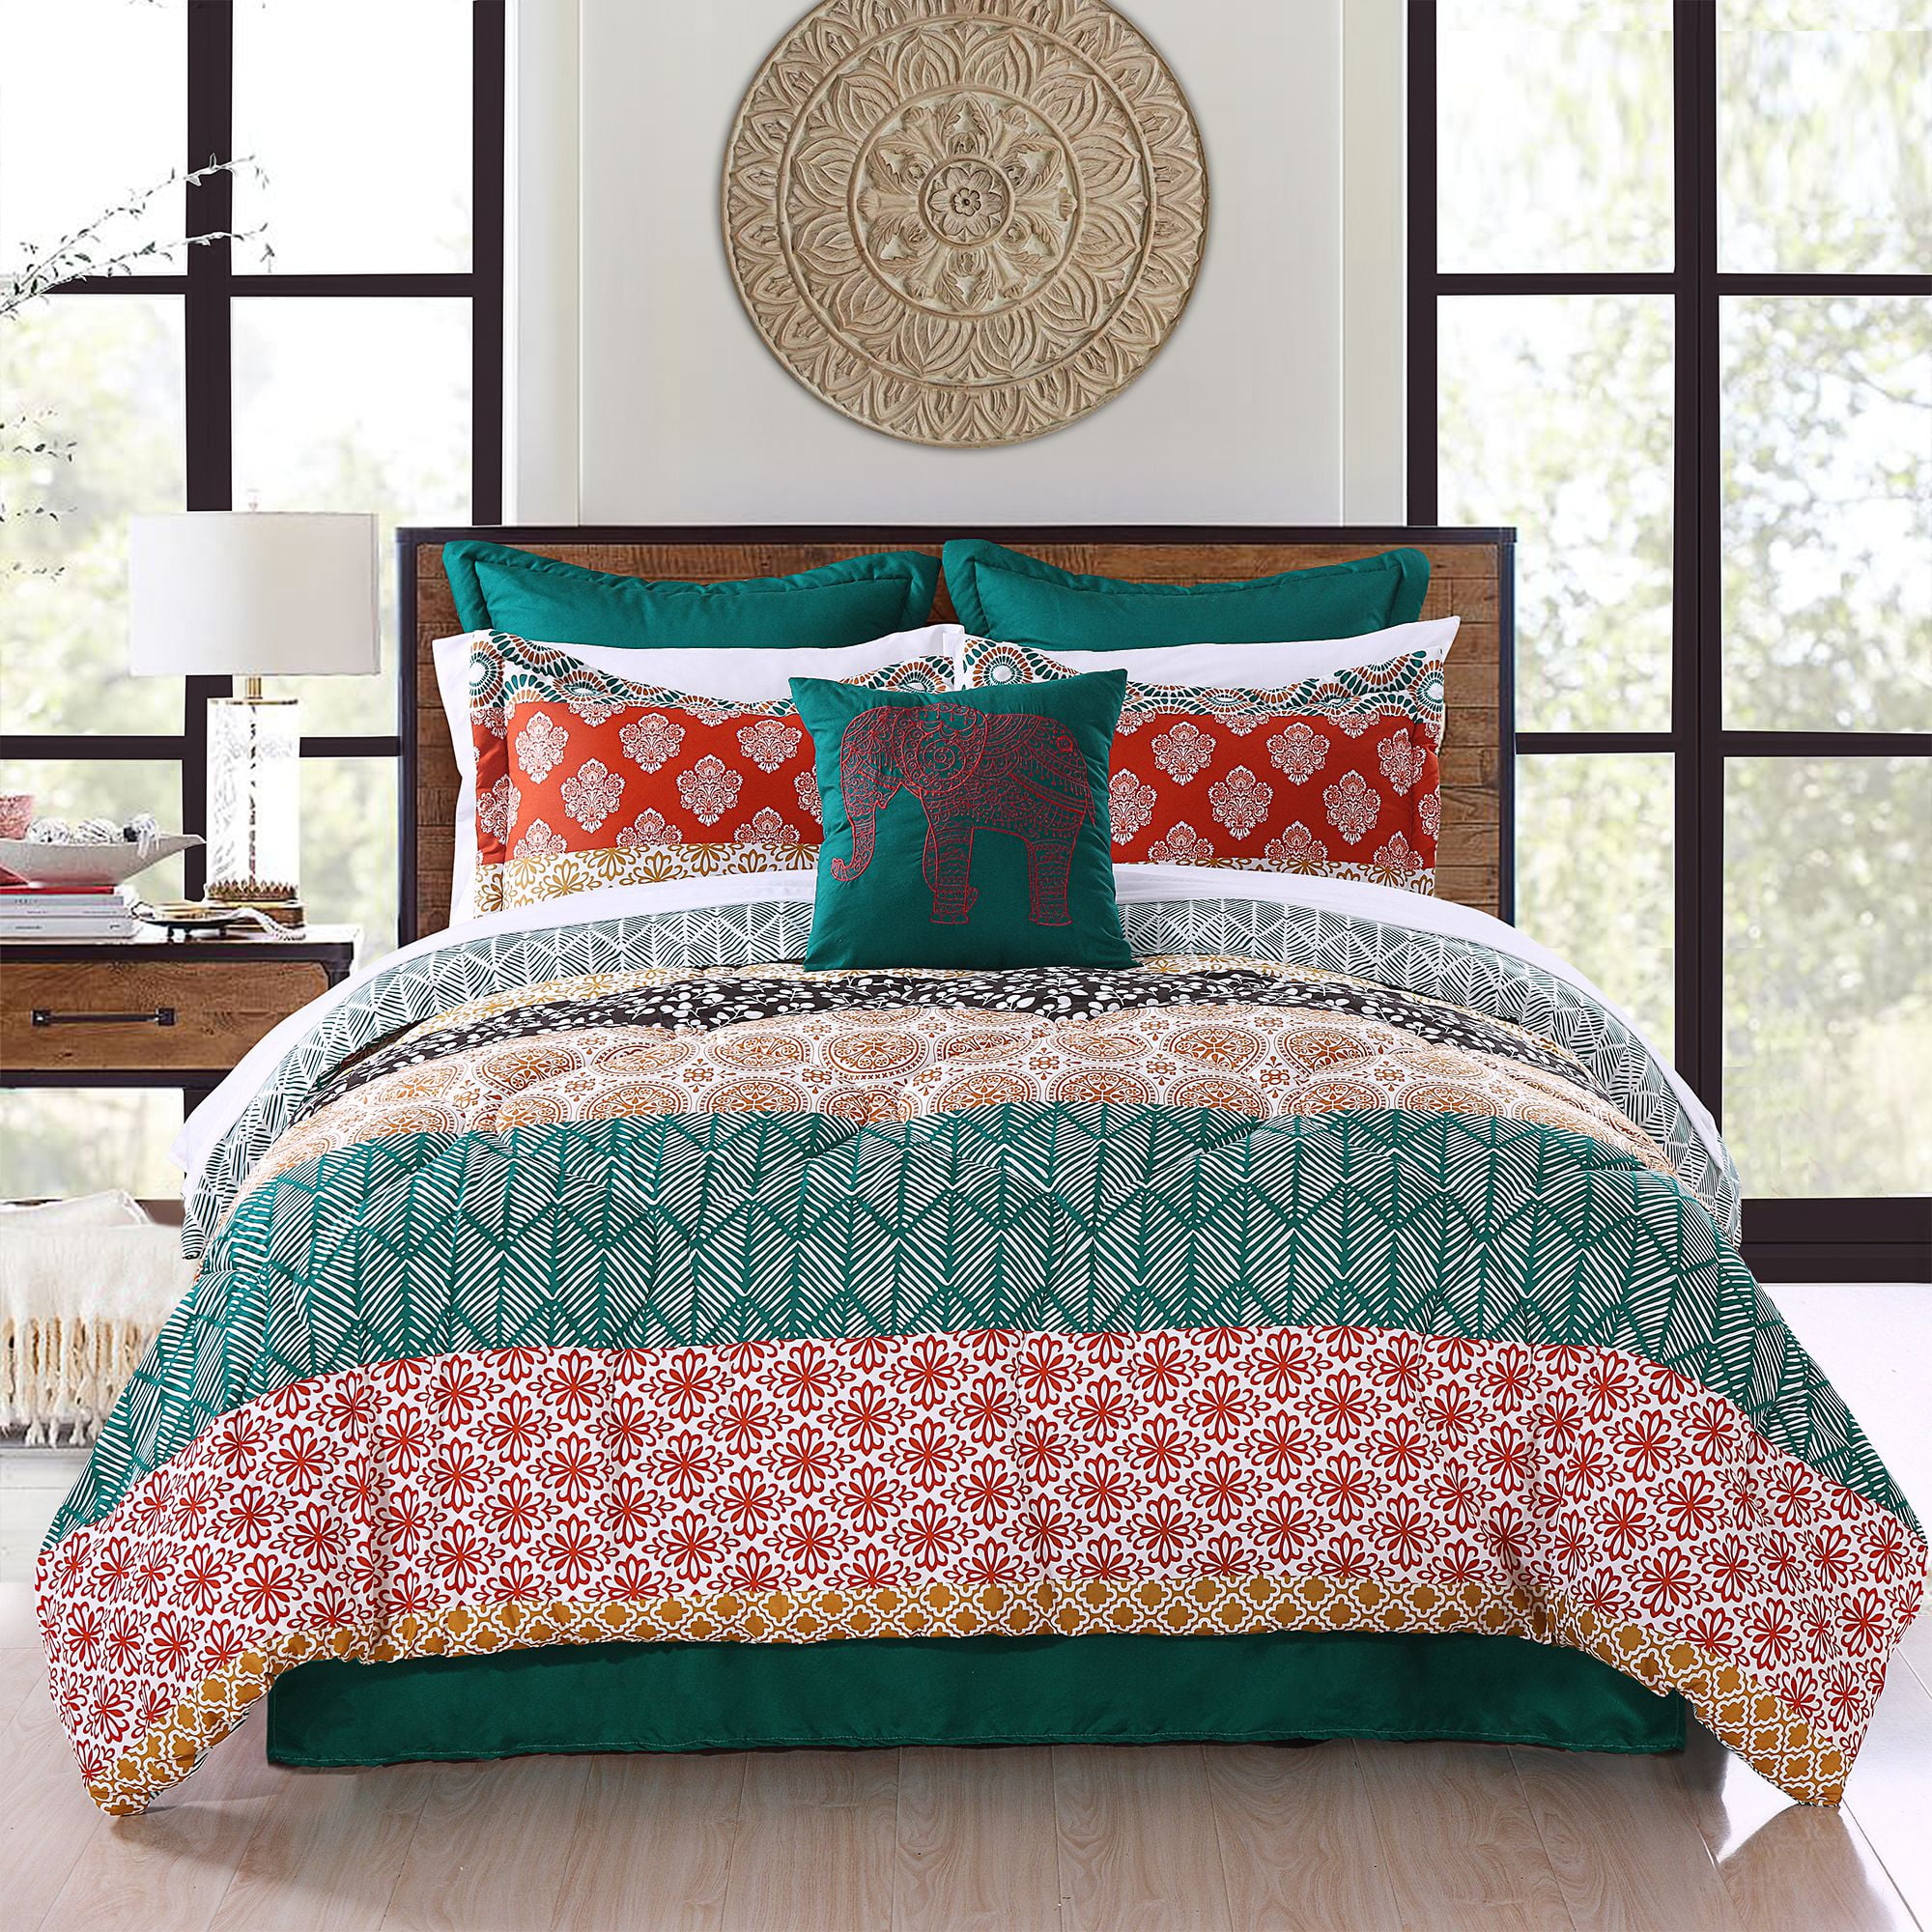 5 Pc Boho Reversible Quilt Set Colorful Bedroom Bed Decor Pillow Full Queen King